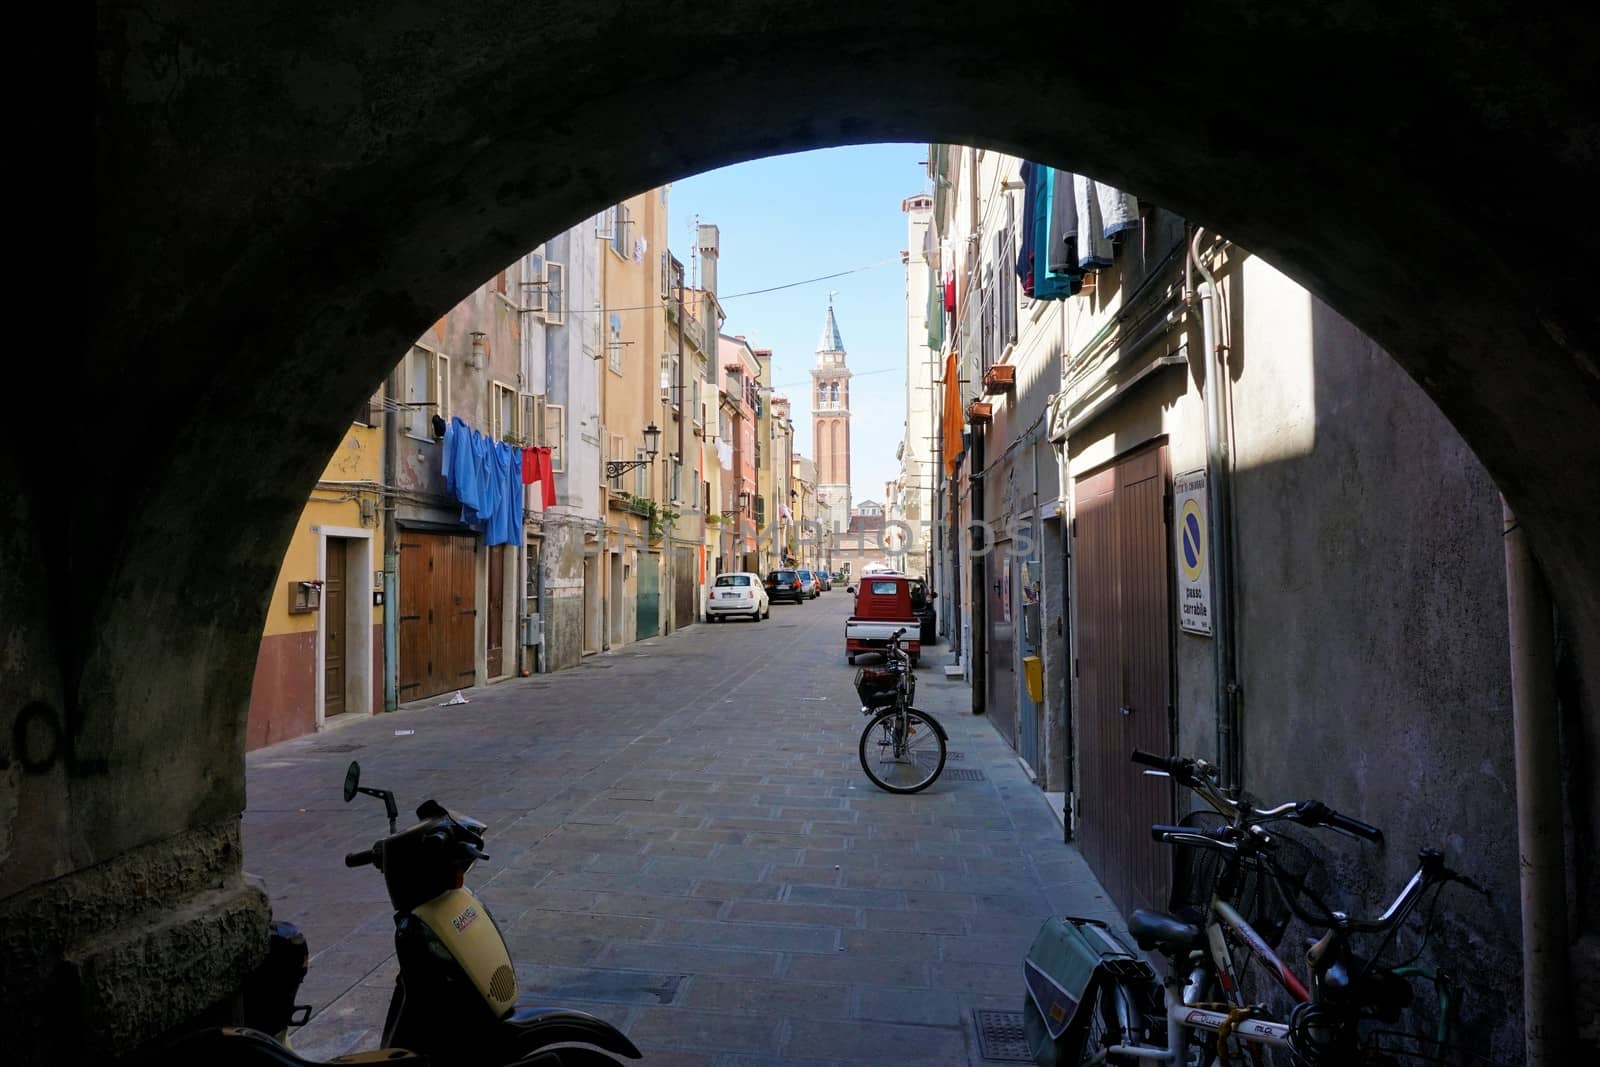 Typical street in the city center of Chioggia, Italy with bicycles, scooters and cars